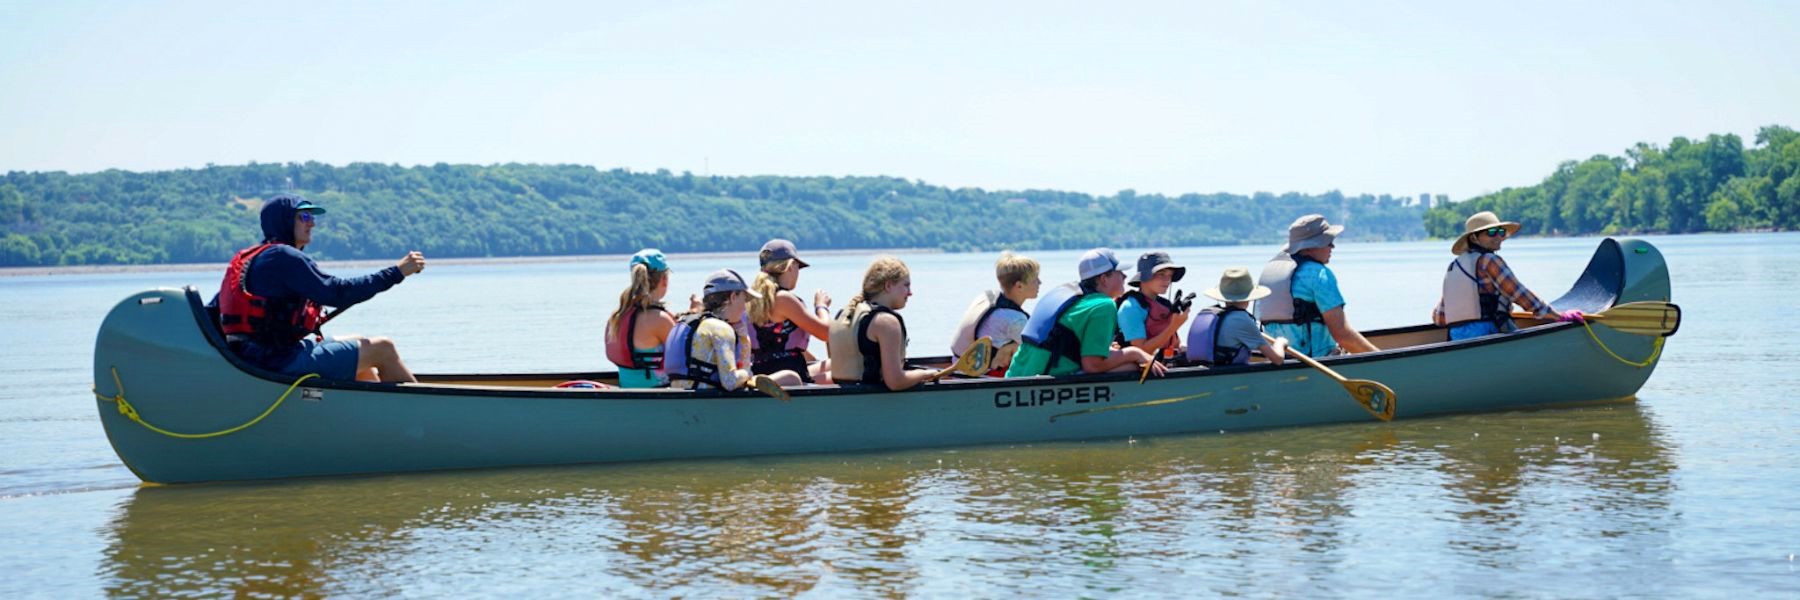 Big Muddy Adventures leads guided tours along the Mississippi and Missouri rivers.